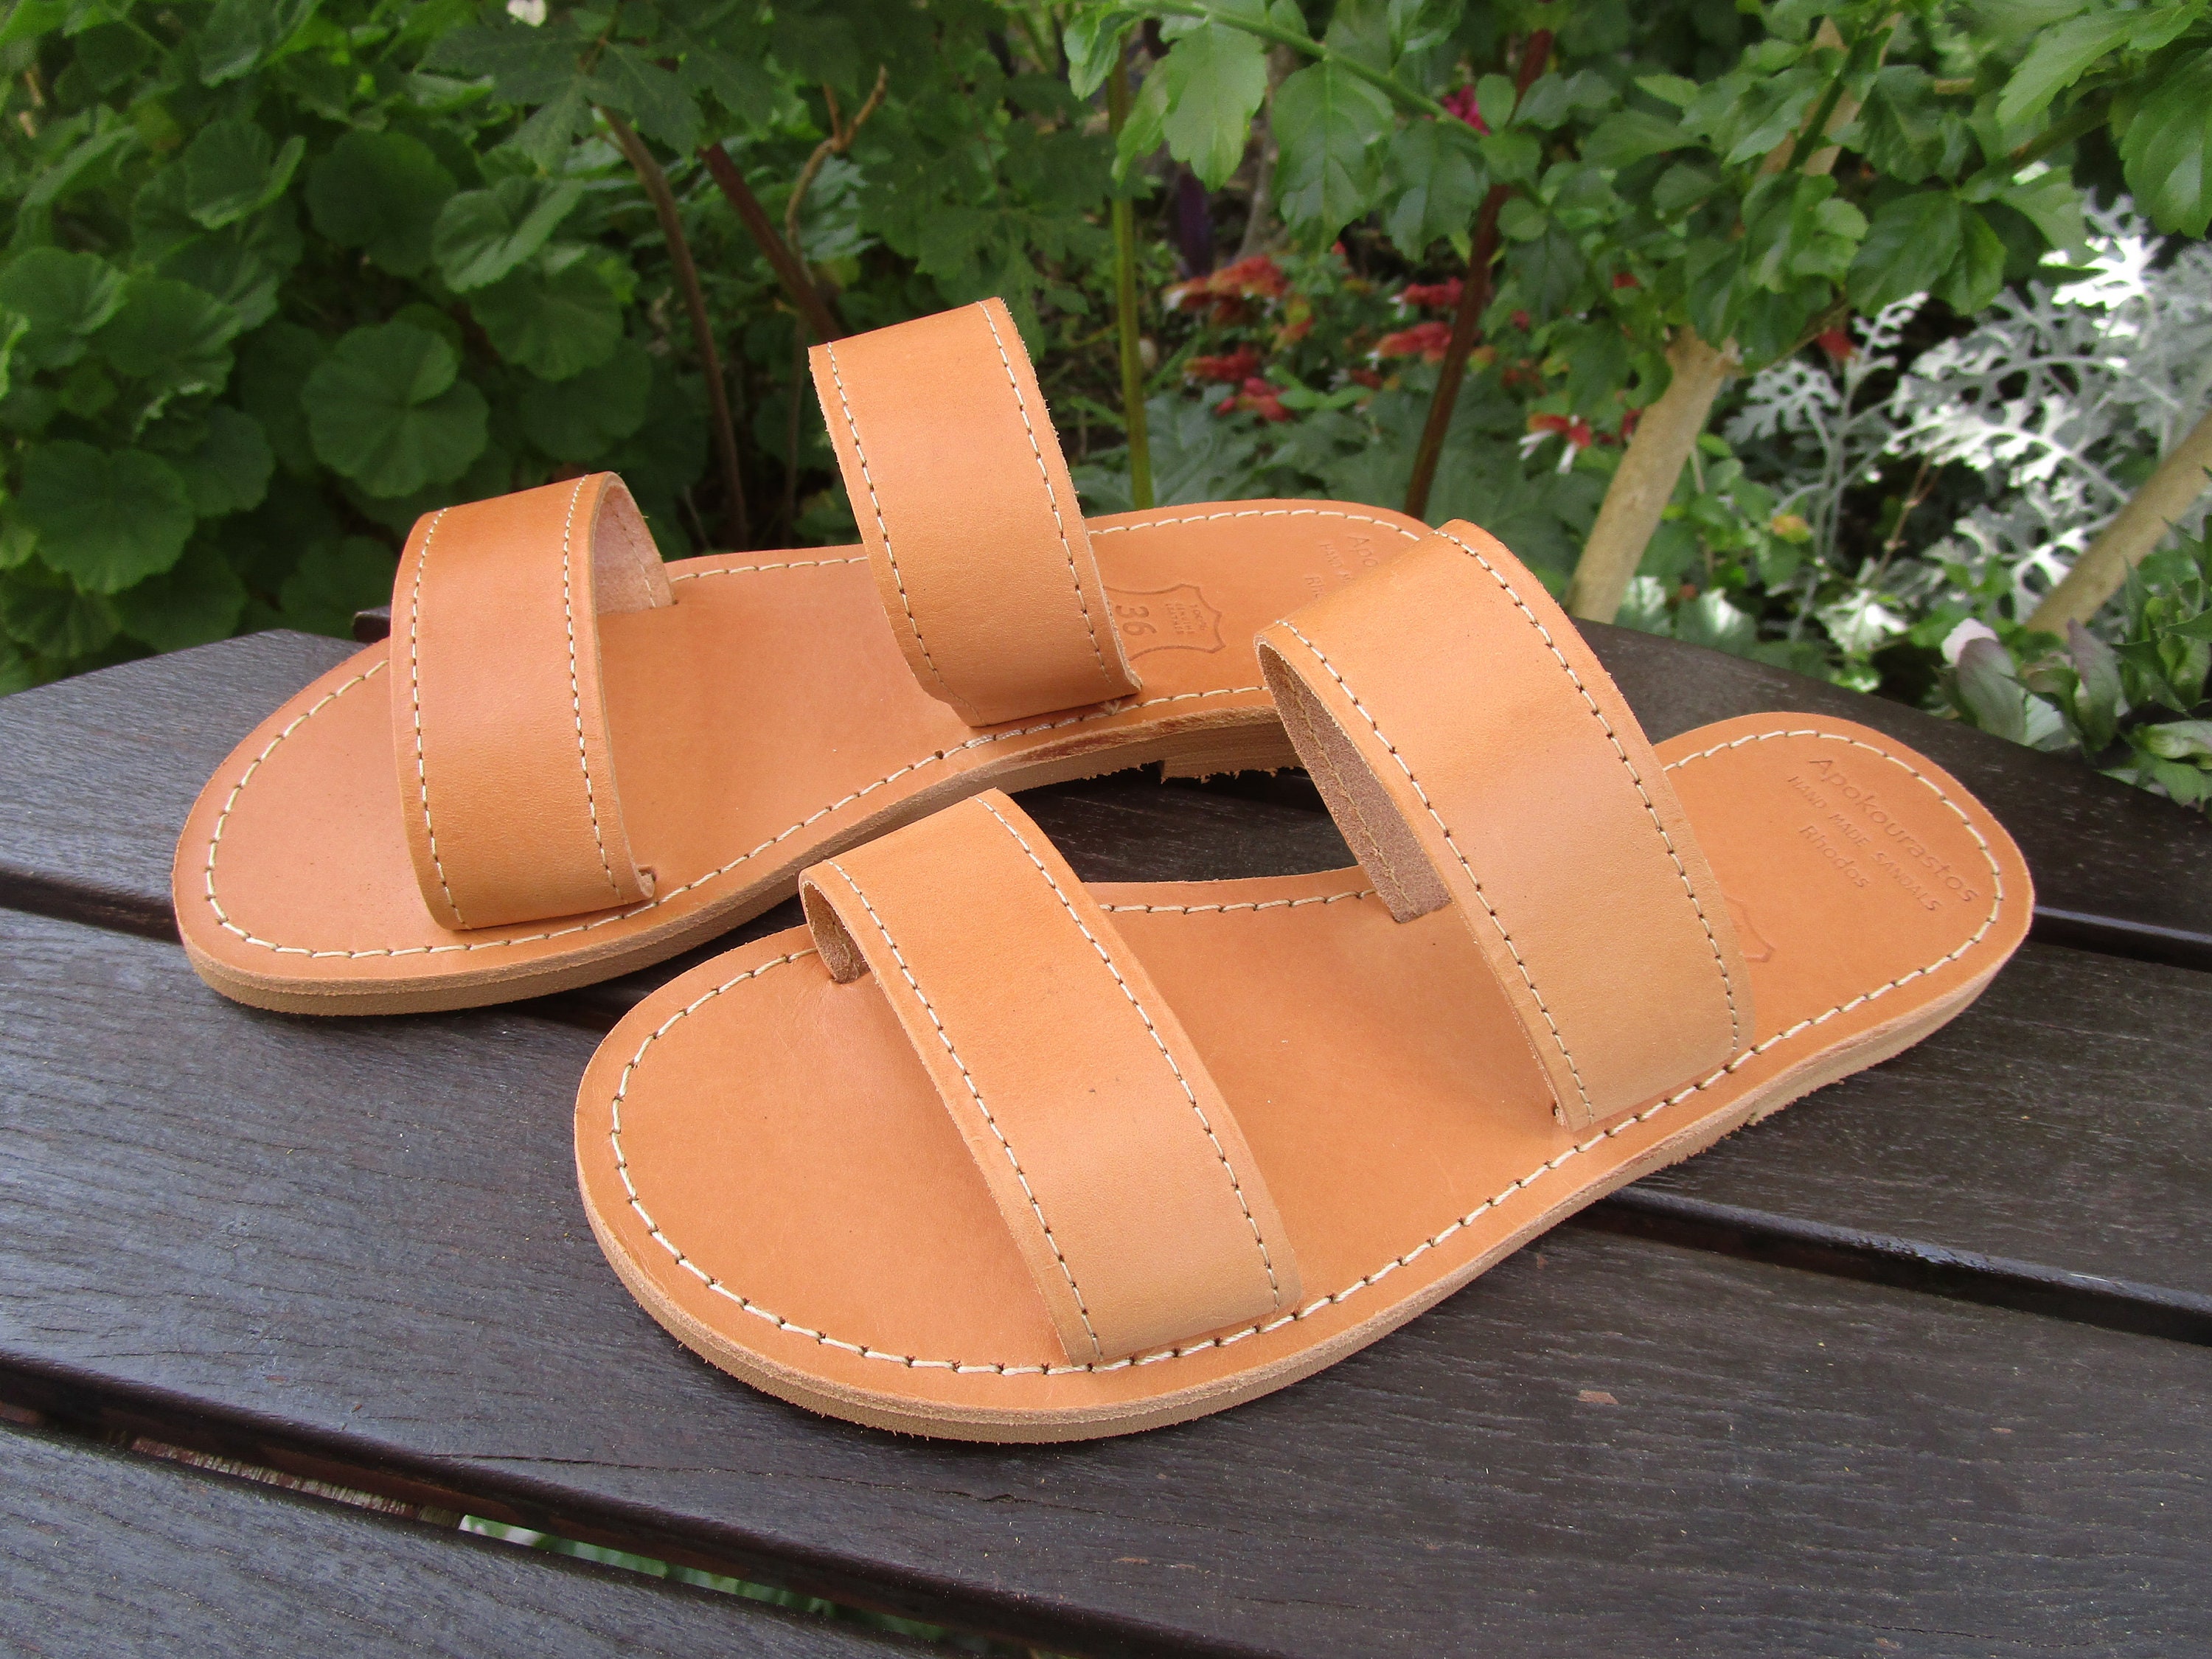 White Veg Tanned Leather belly, Calf Skin for Belts, Sandals